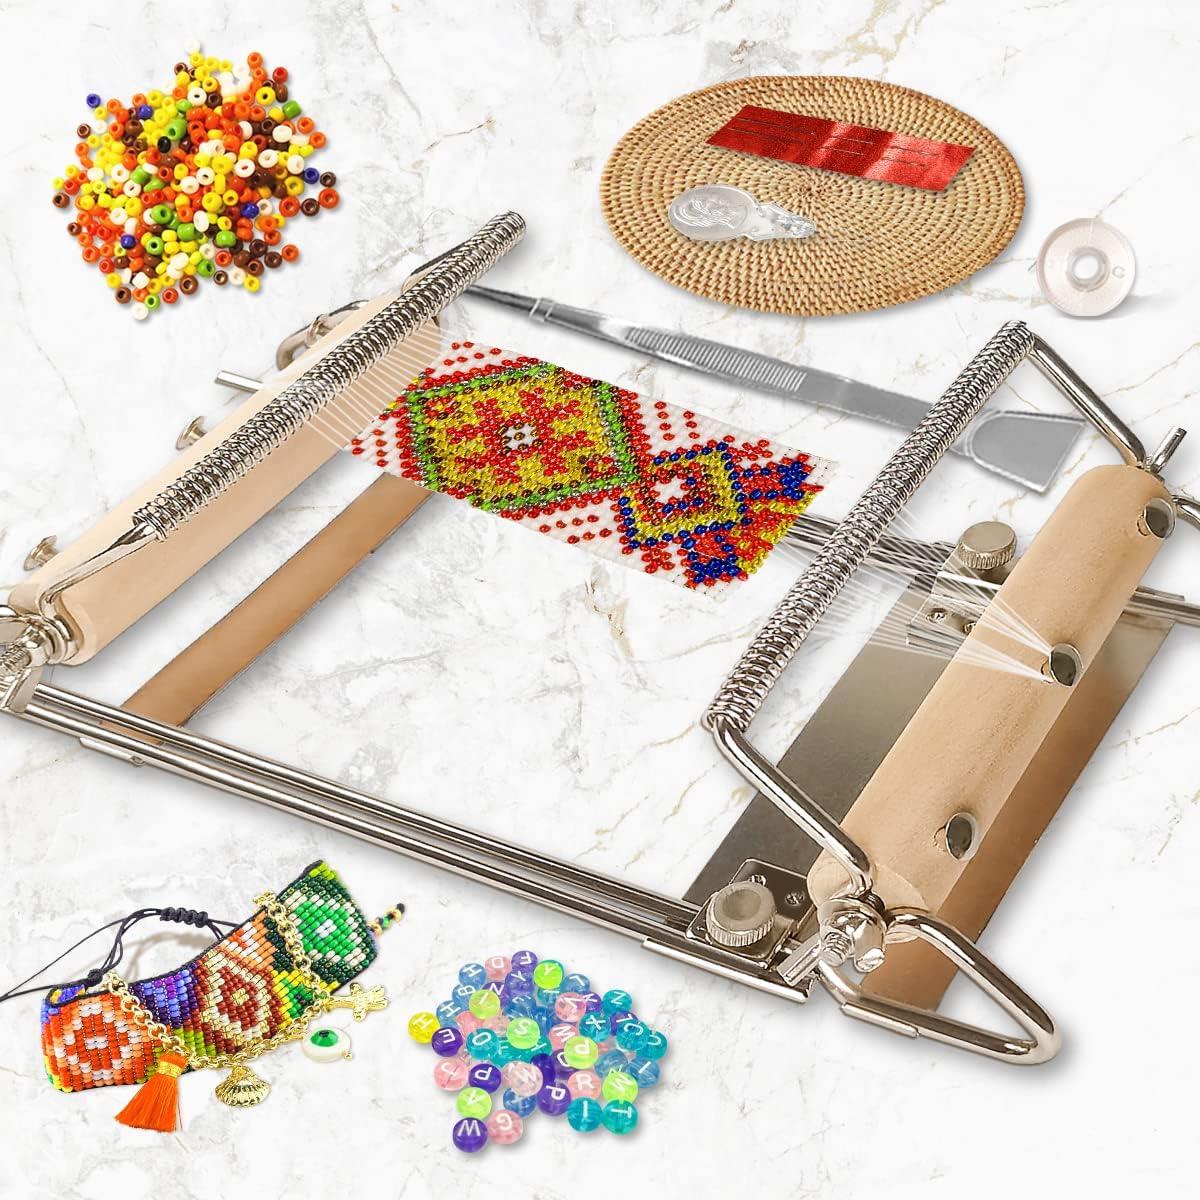 HOBBYWORKER Wooden Bead Loom Set With Tweezers Toothbrush, Includes  Assembly Instructions, For Create Bracelets, Necklaces, Belts, And More  Jewelry Making Crafts